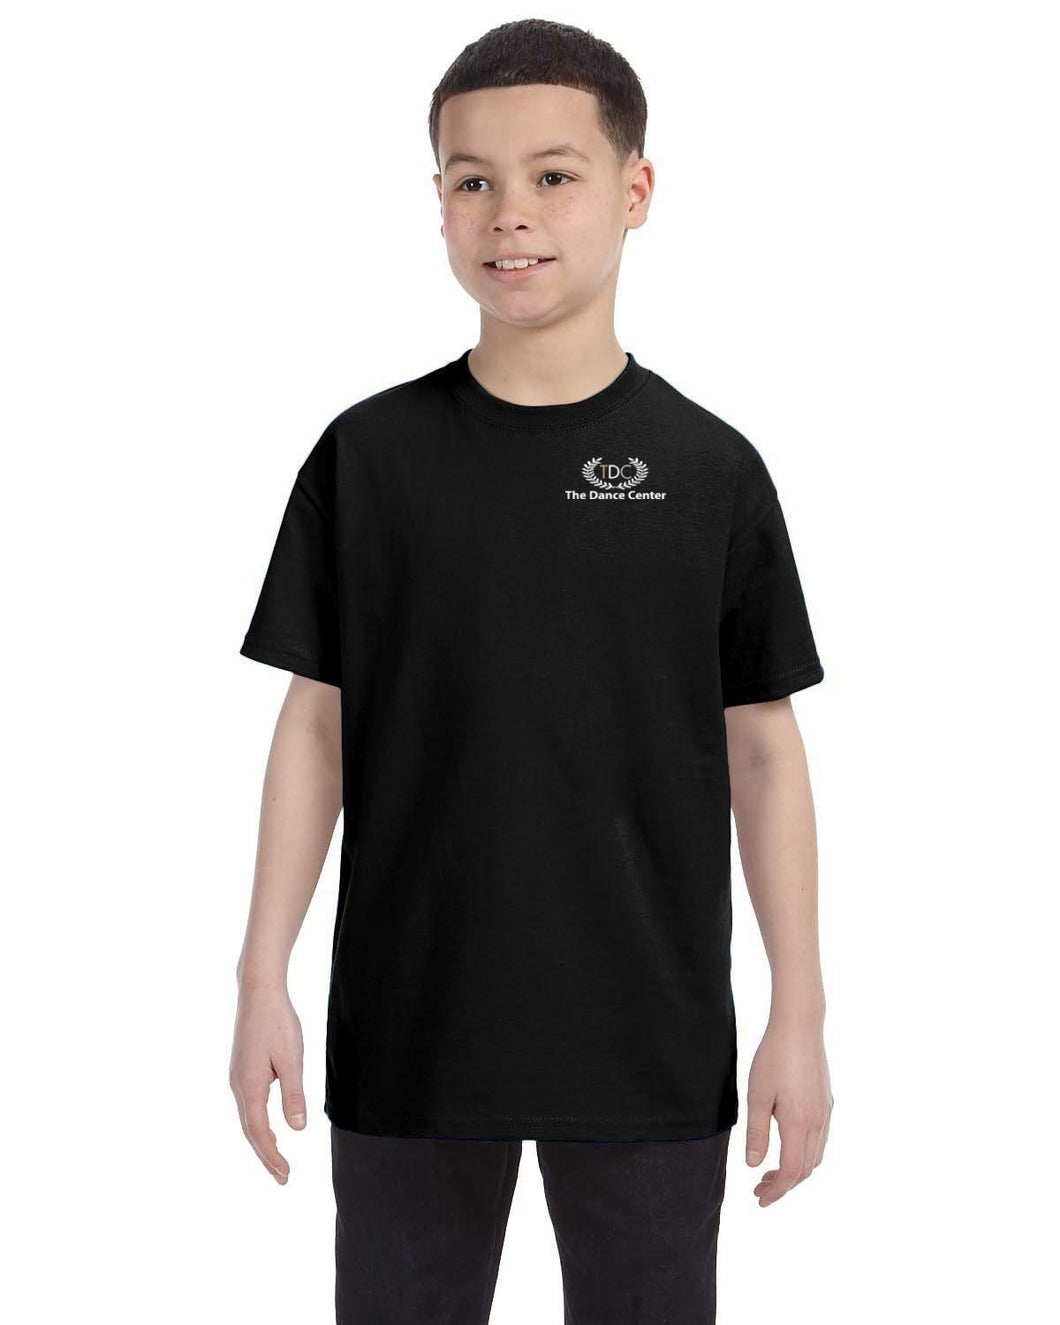 TDC Dance Dandelion Youth Shirt Front and Back